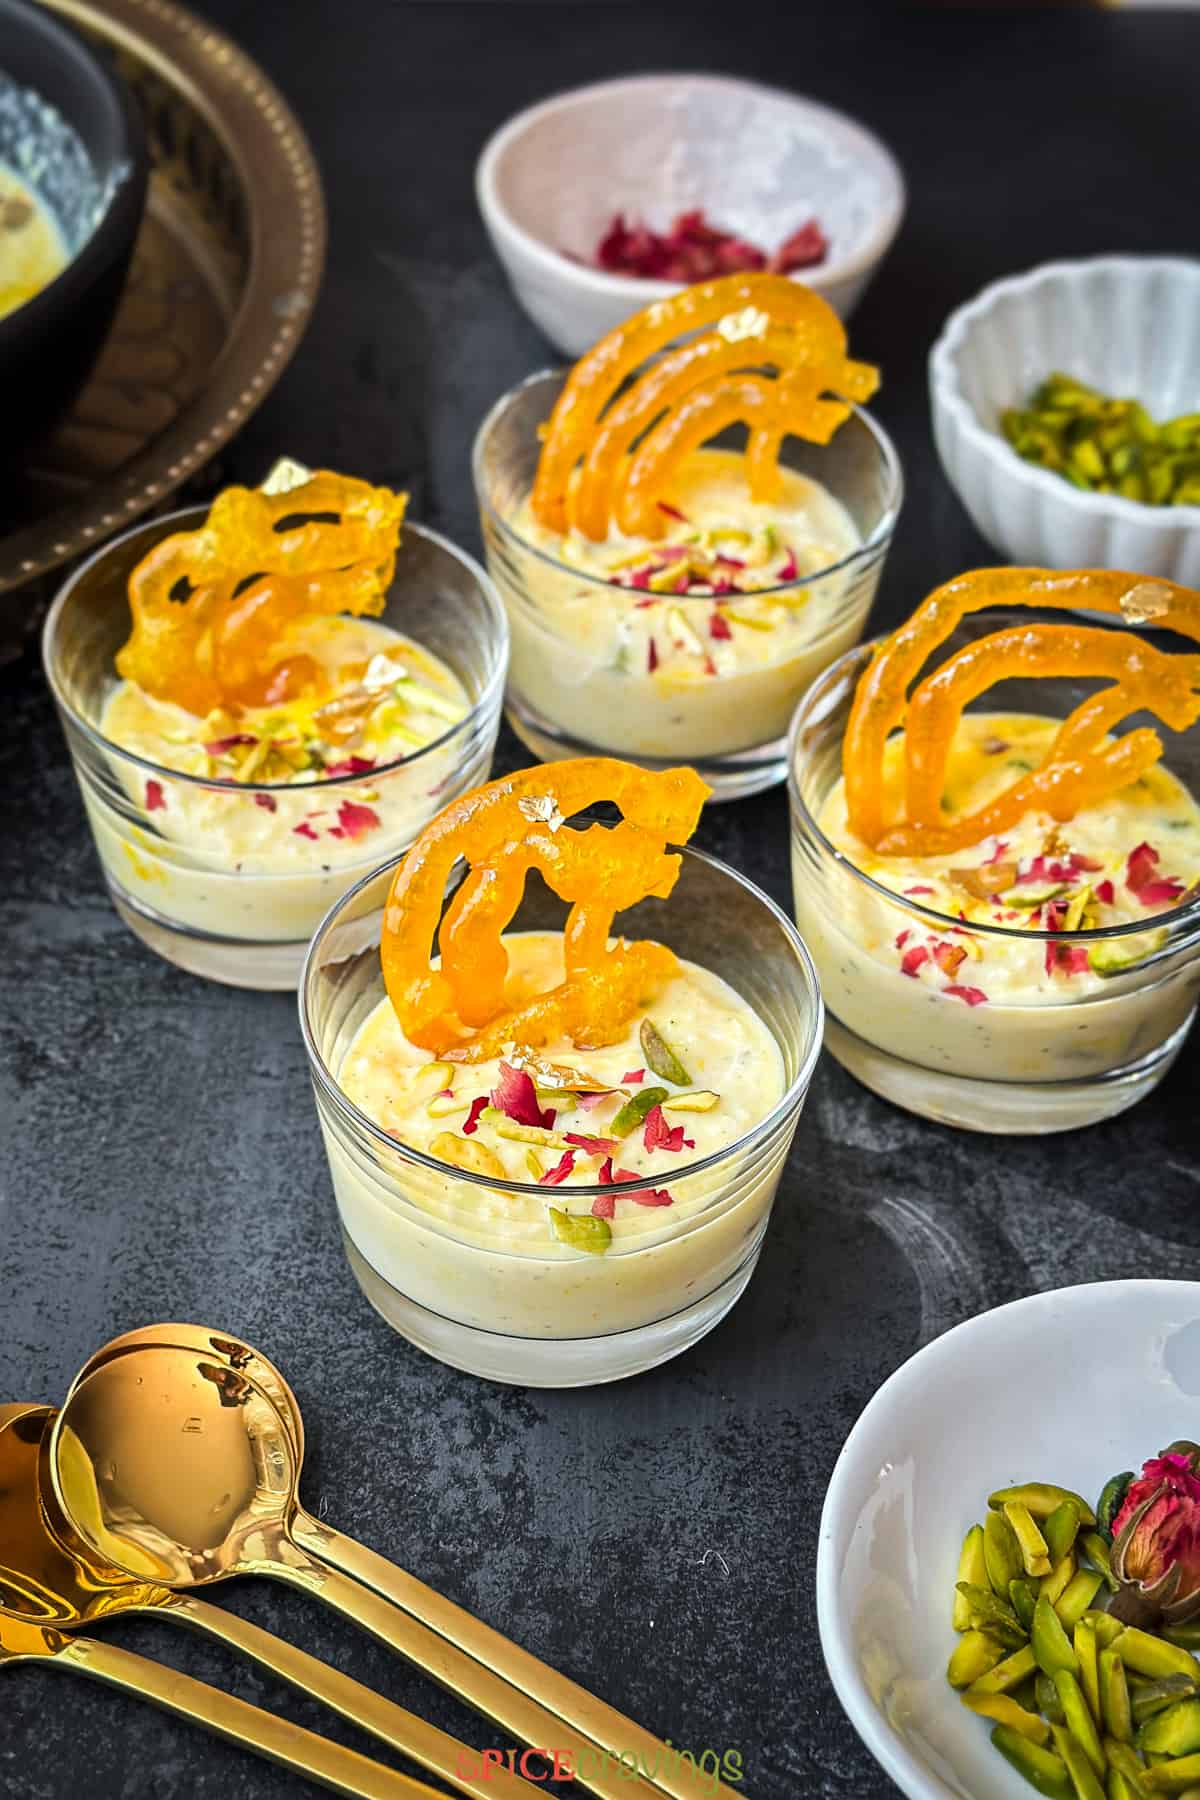 4 cups filled with rabdi, garnished with jalebi